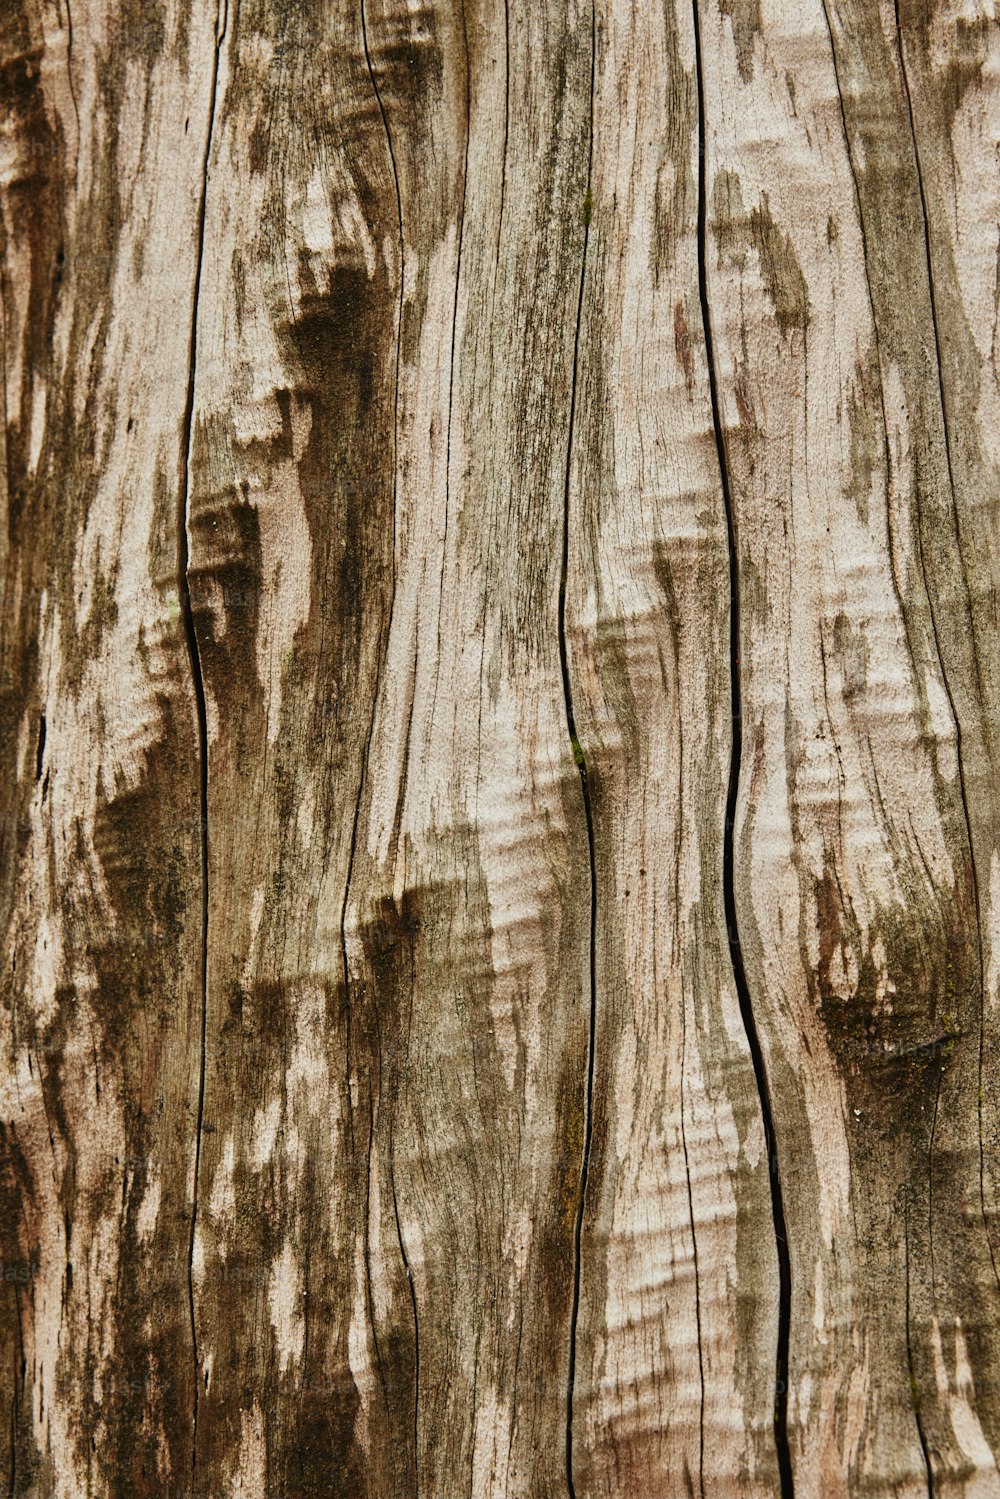 a close up of a tree trunk with woodgrain